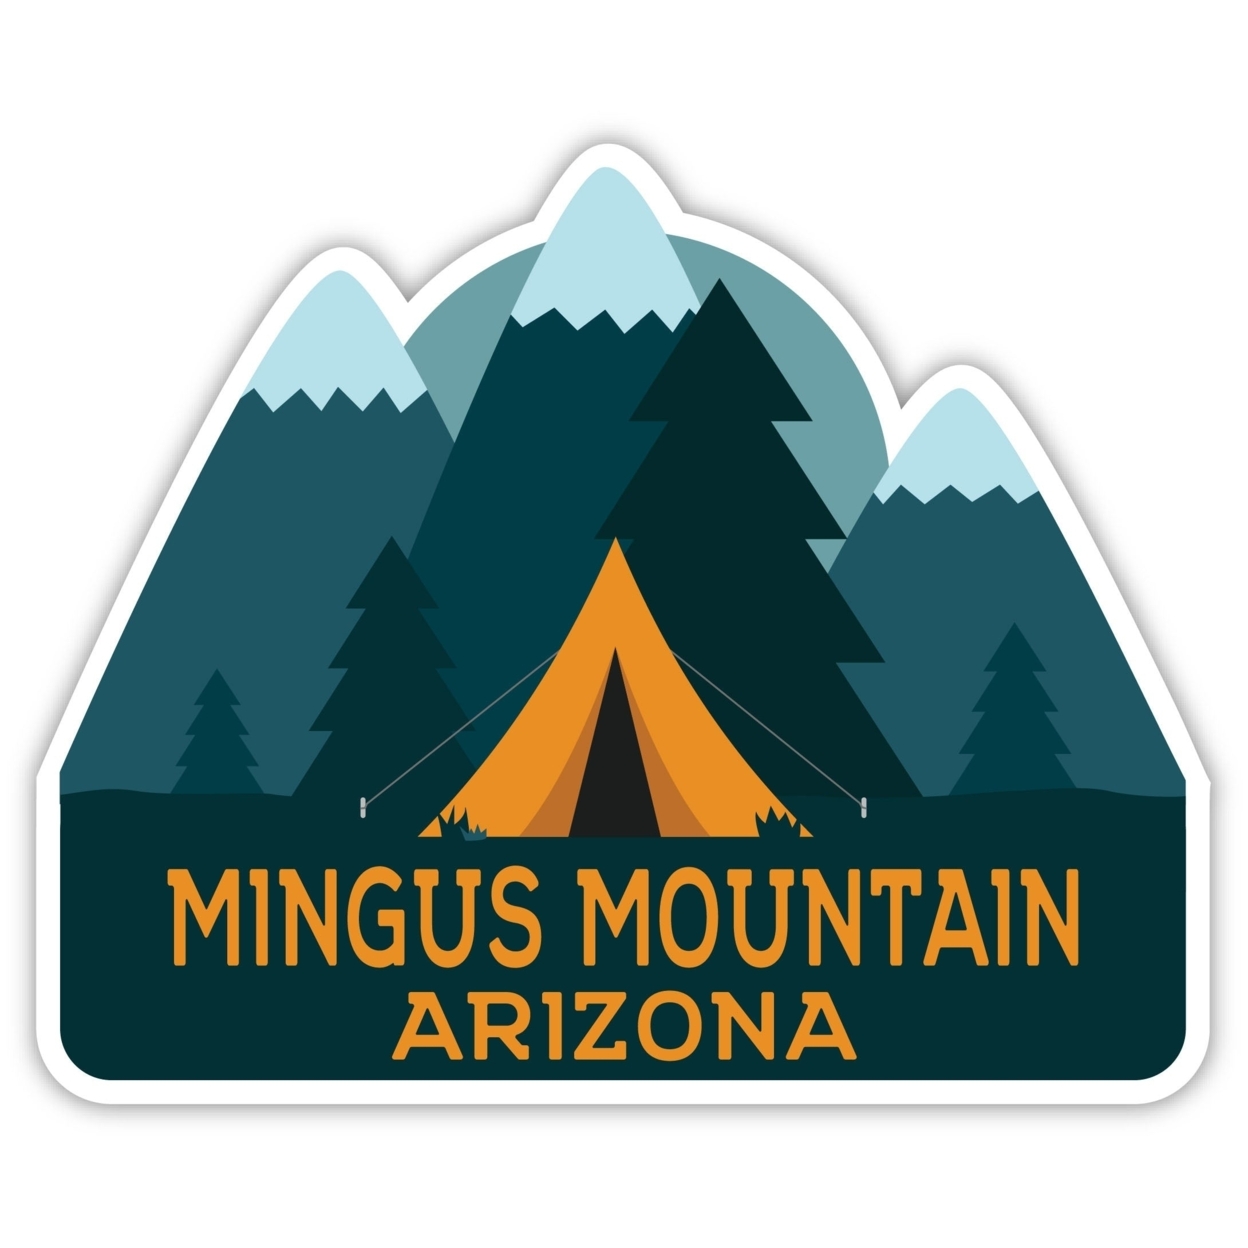 Mingus Mountain Arizona Souvenir Decorative Stickers (Choose Theme And Size) - 4-Inch, Great Outdoors